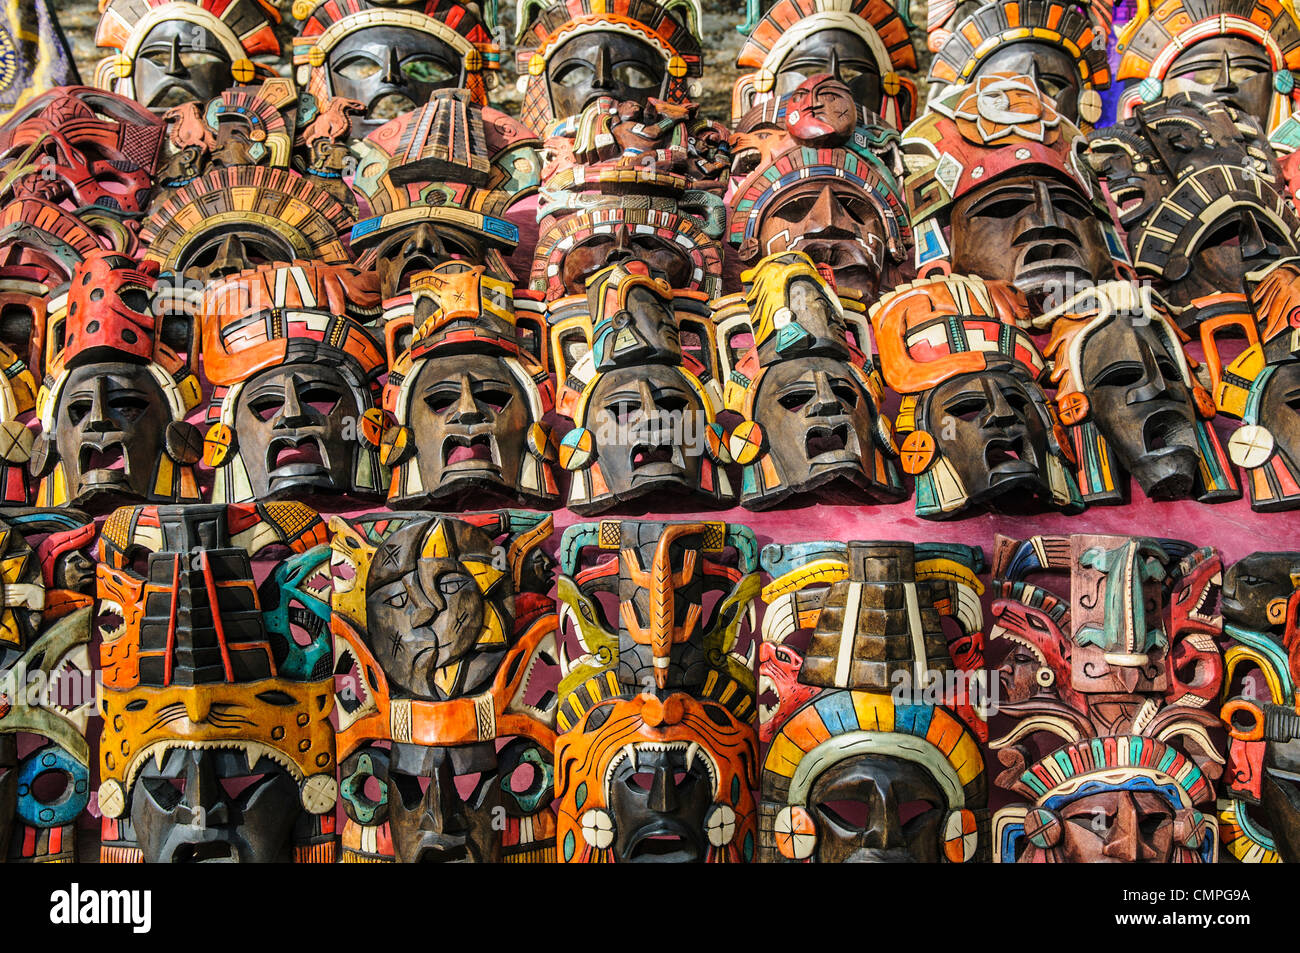 CHICHEN ITZA, Mexico - Market stalls selling wooden masks and other local souvenirs and handicrafts to tourists visiting Chichen Itza Mayan ruins archeological site in Mexico. Stock Photo